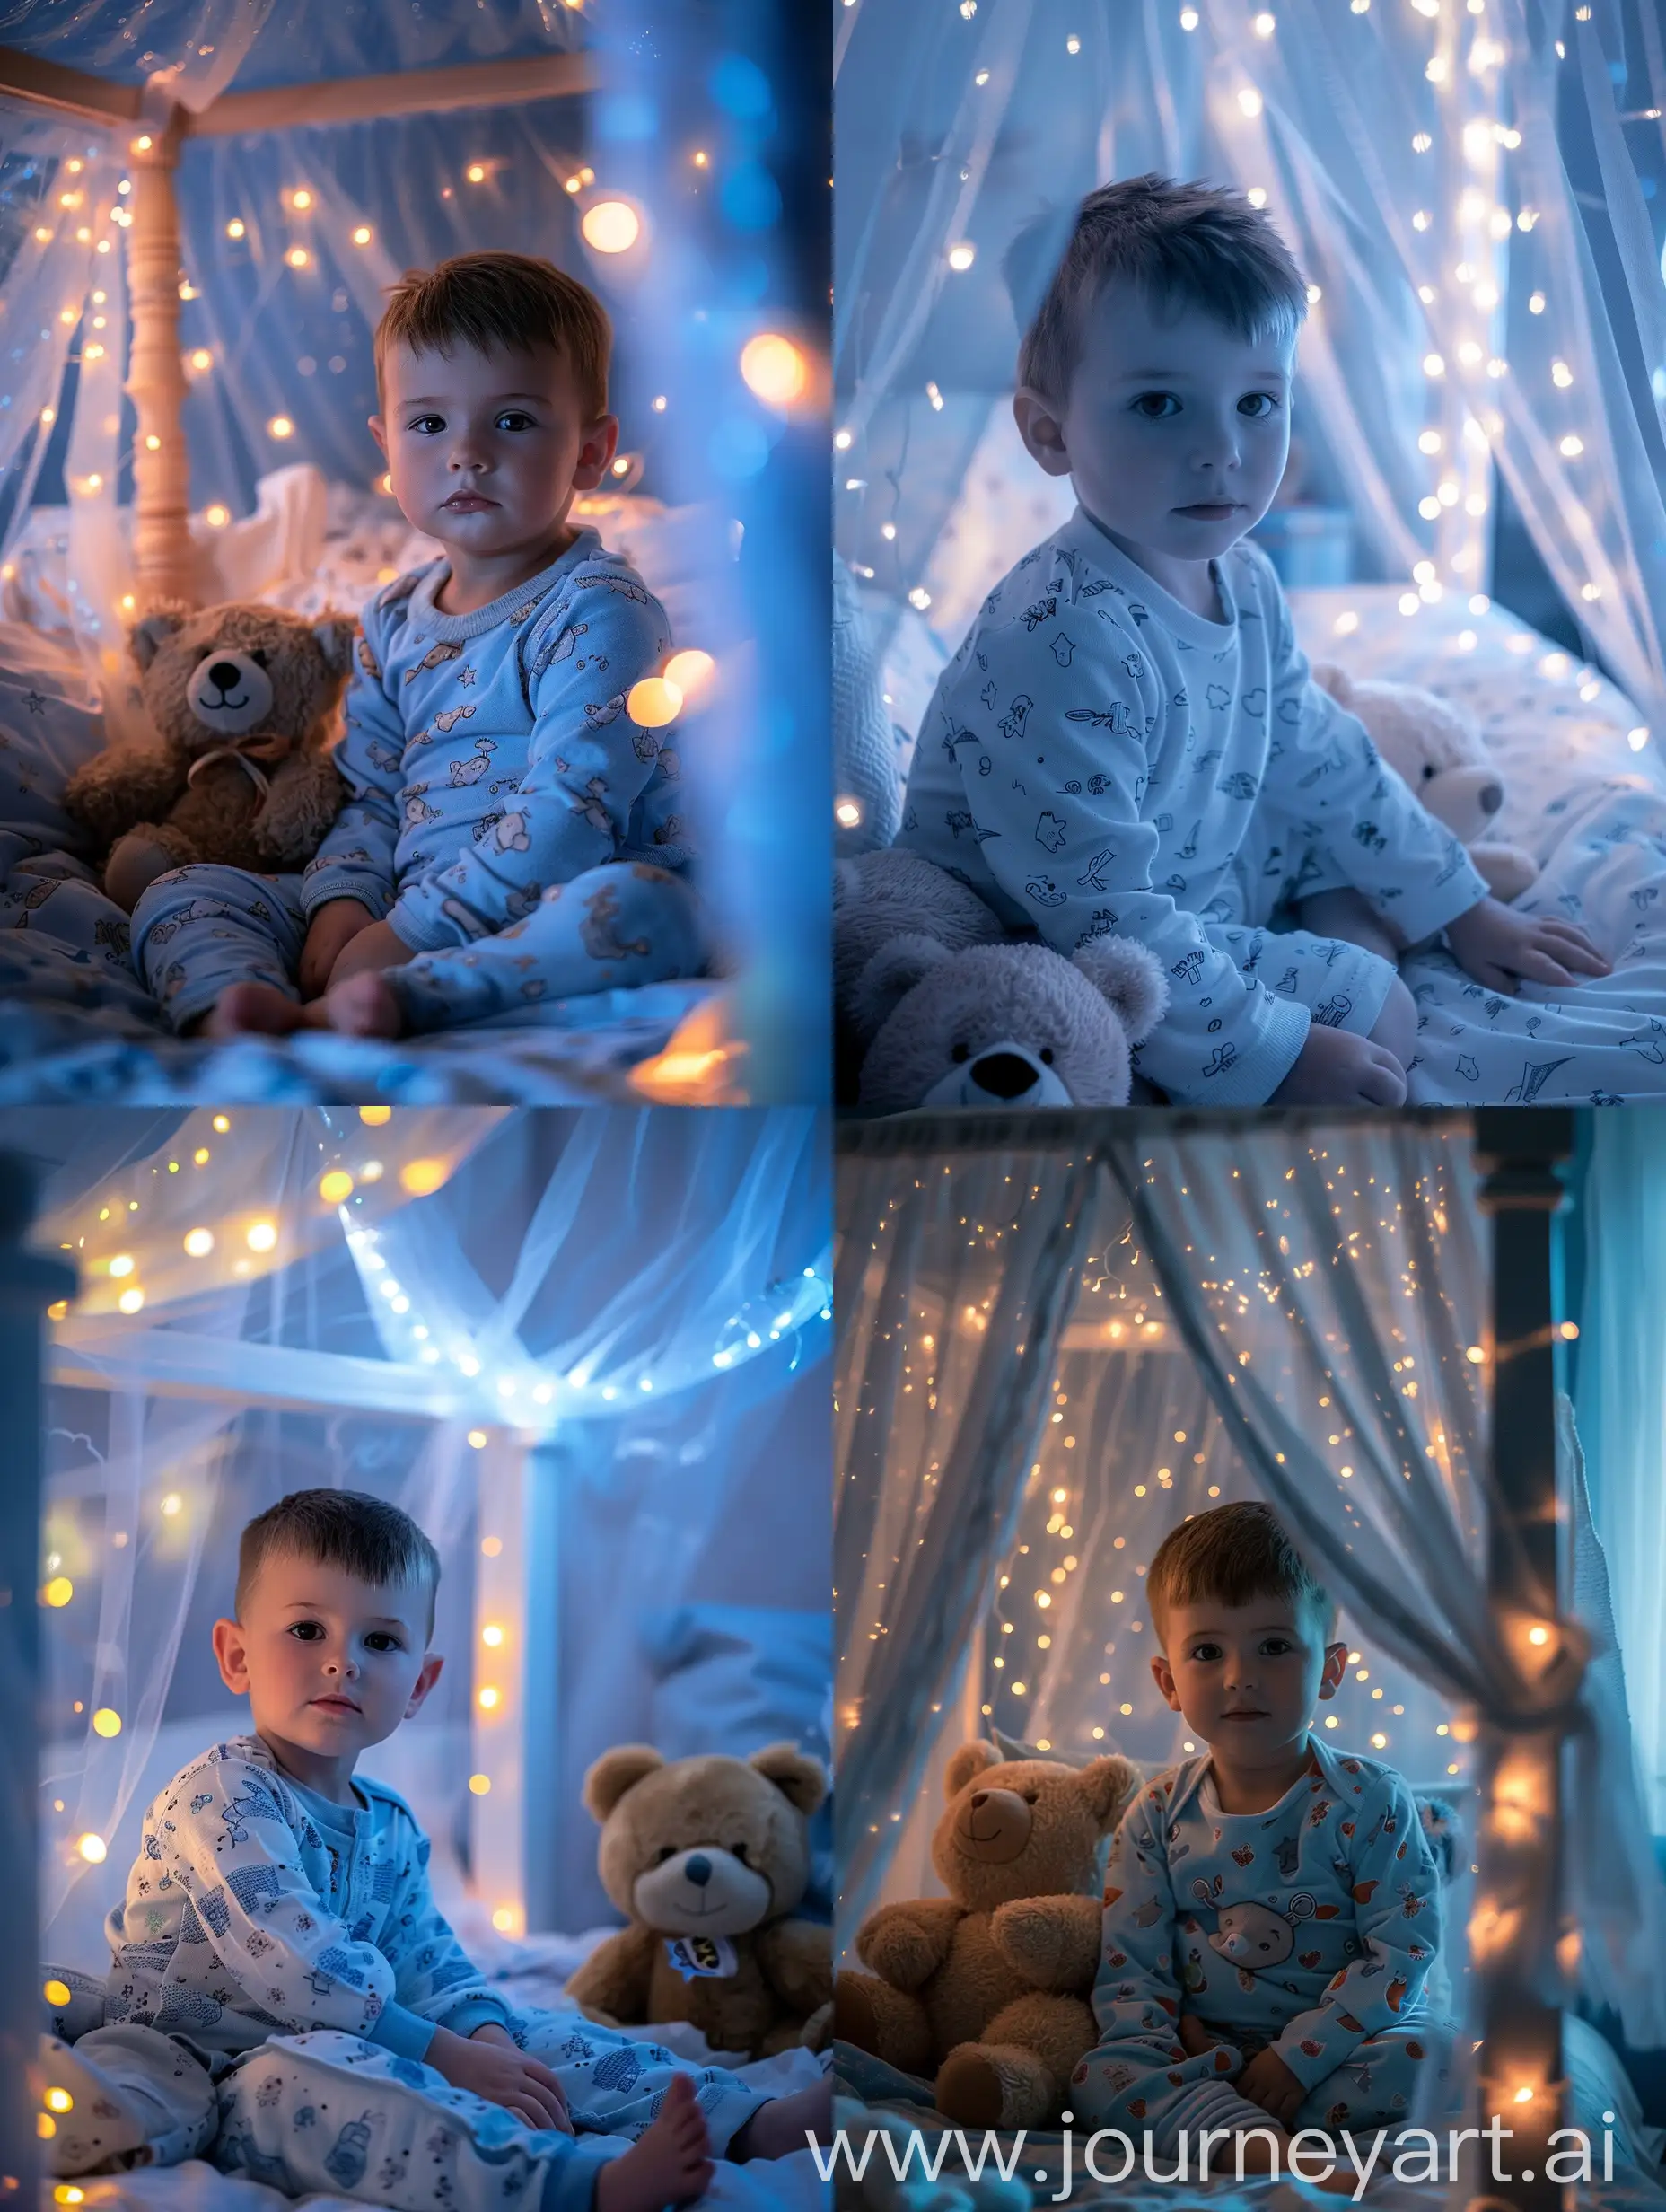 A little boy with short hair in pajamas is sitting on a four-poster bed, the canopy glows with lights, next to a teddy bear, close-up, realistic photo, hyperrealism, face is clearly visible, looking at the camera, photo in blue and white tones, close-up photo, light photography